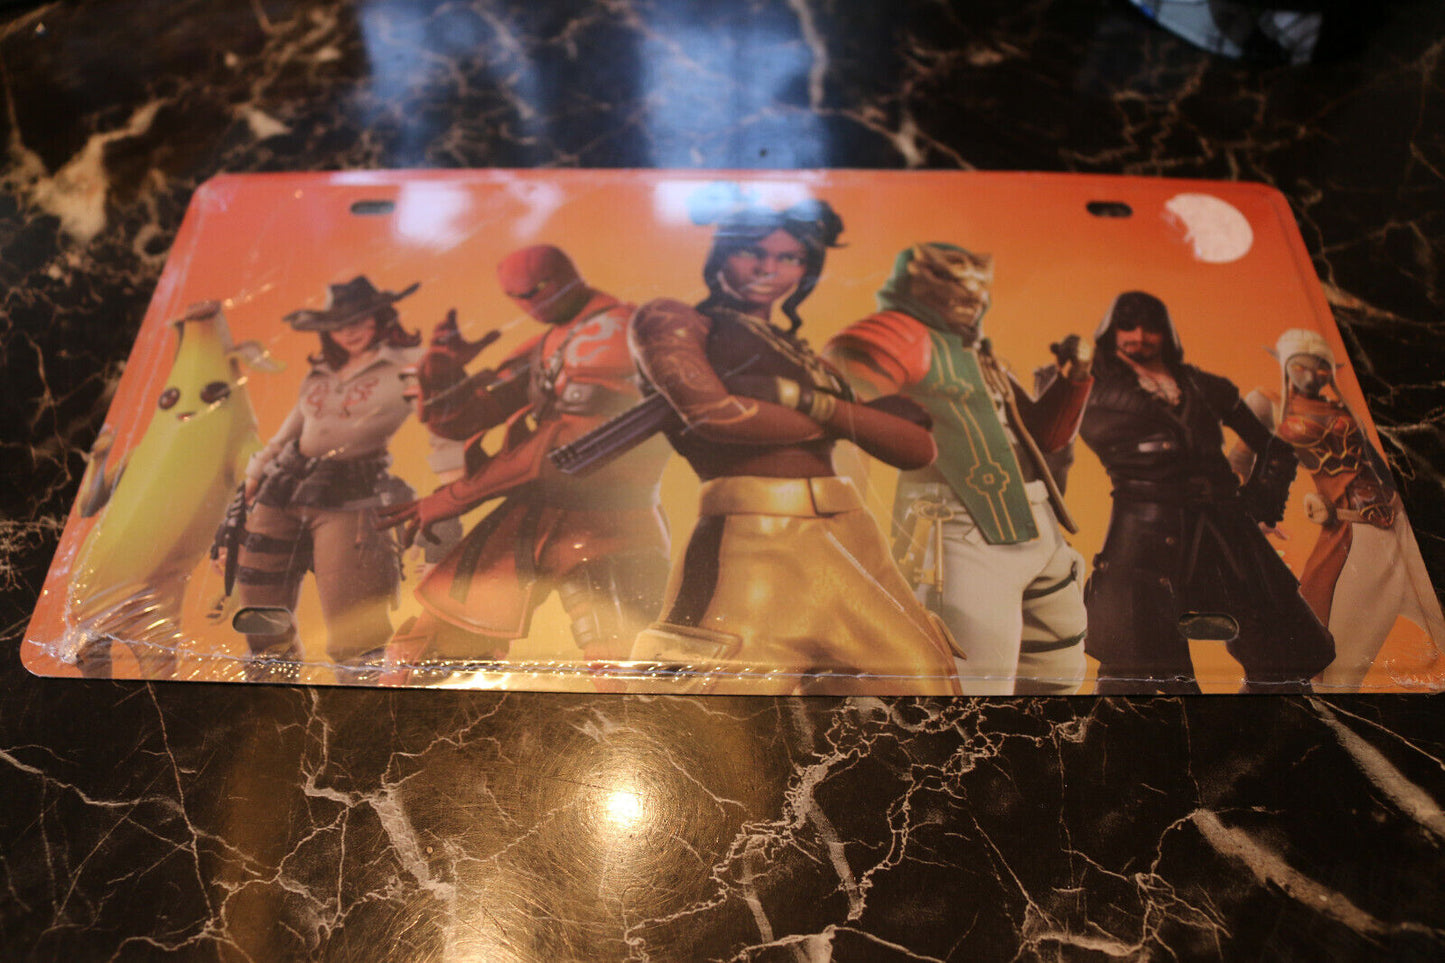 Fortnite Vehicle License Plate Car Front Tag Video Game Geek #2